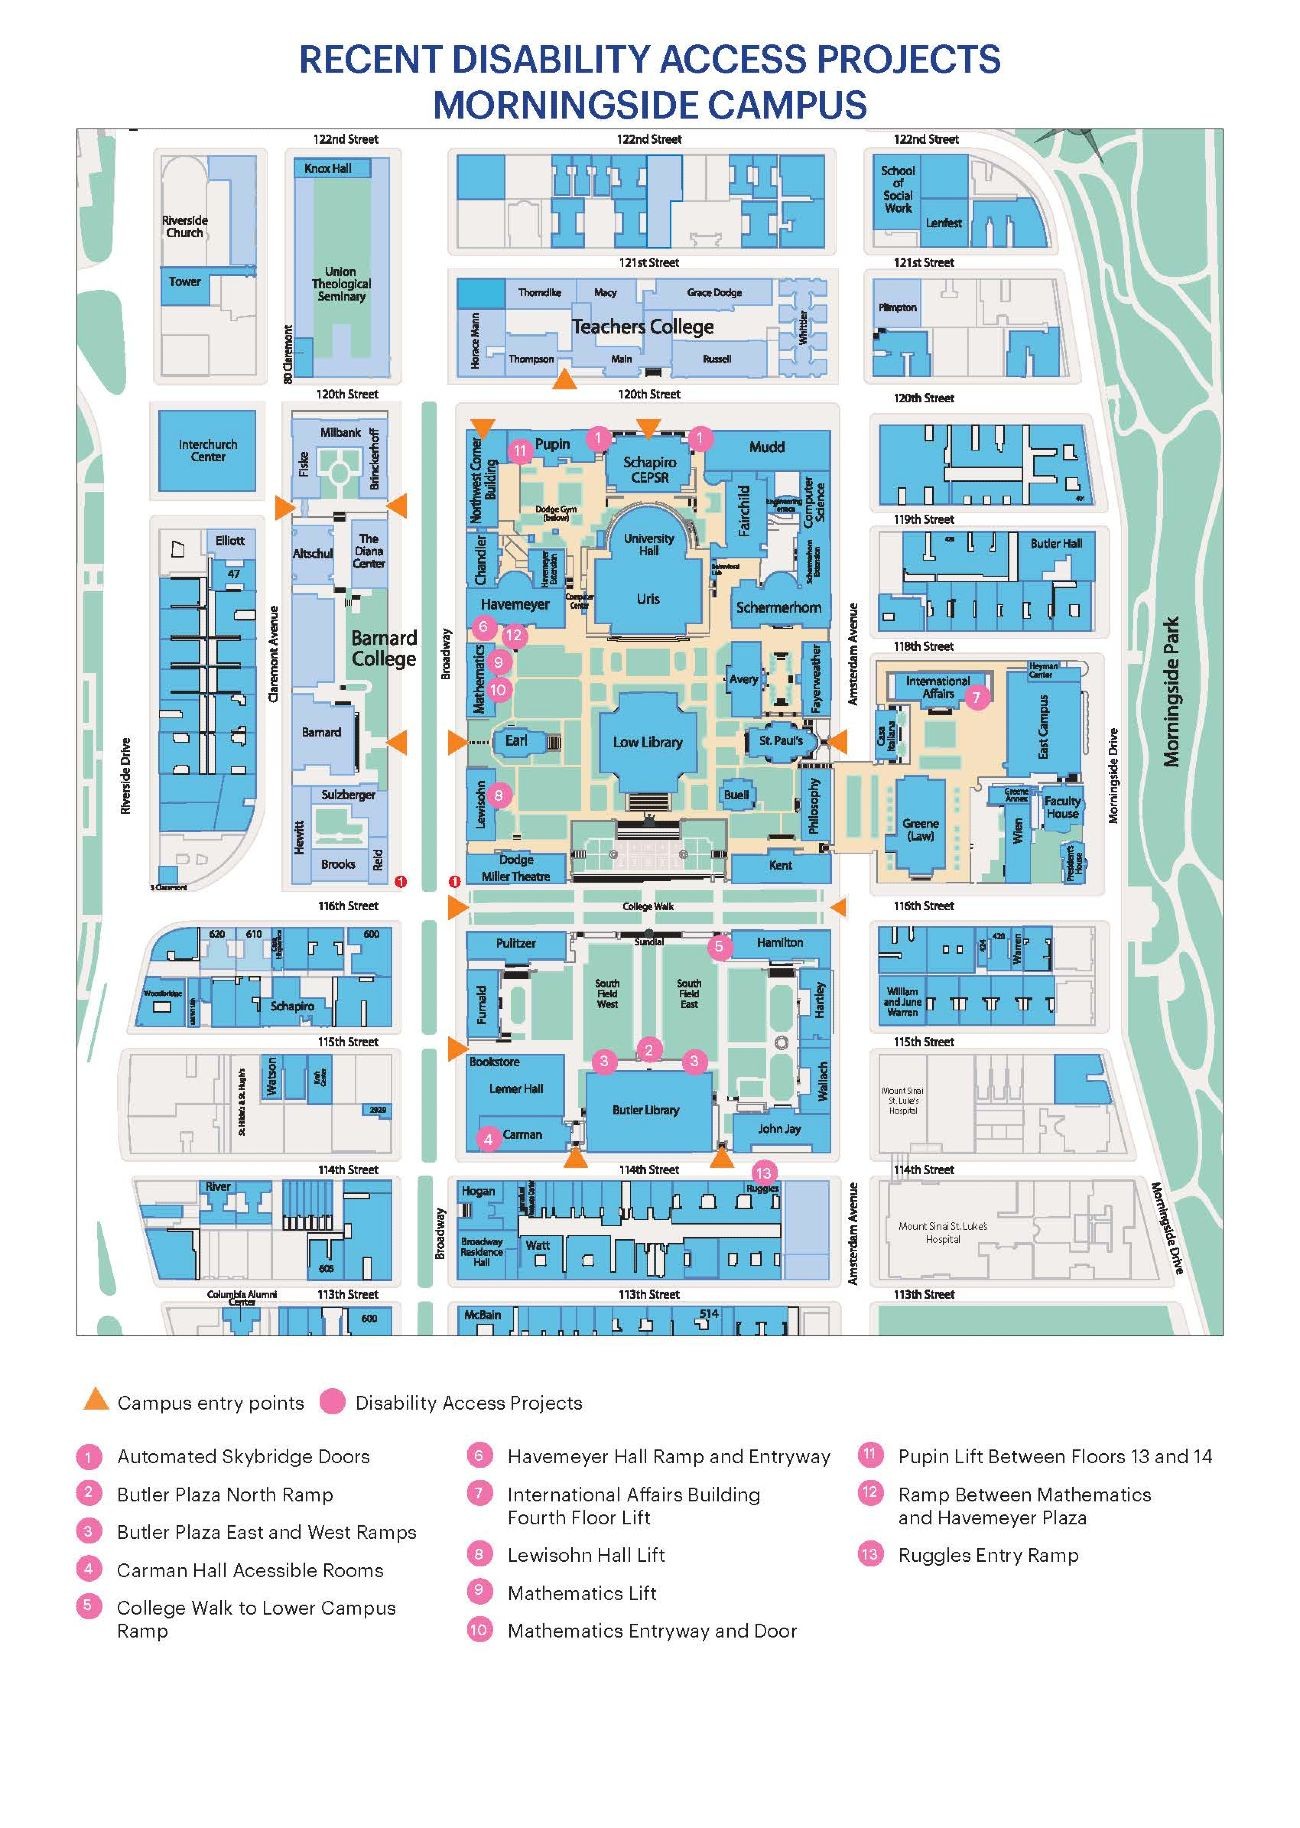 Map of Disability Access Projects on campus showing where access will be added